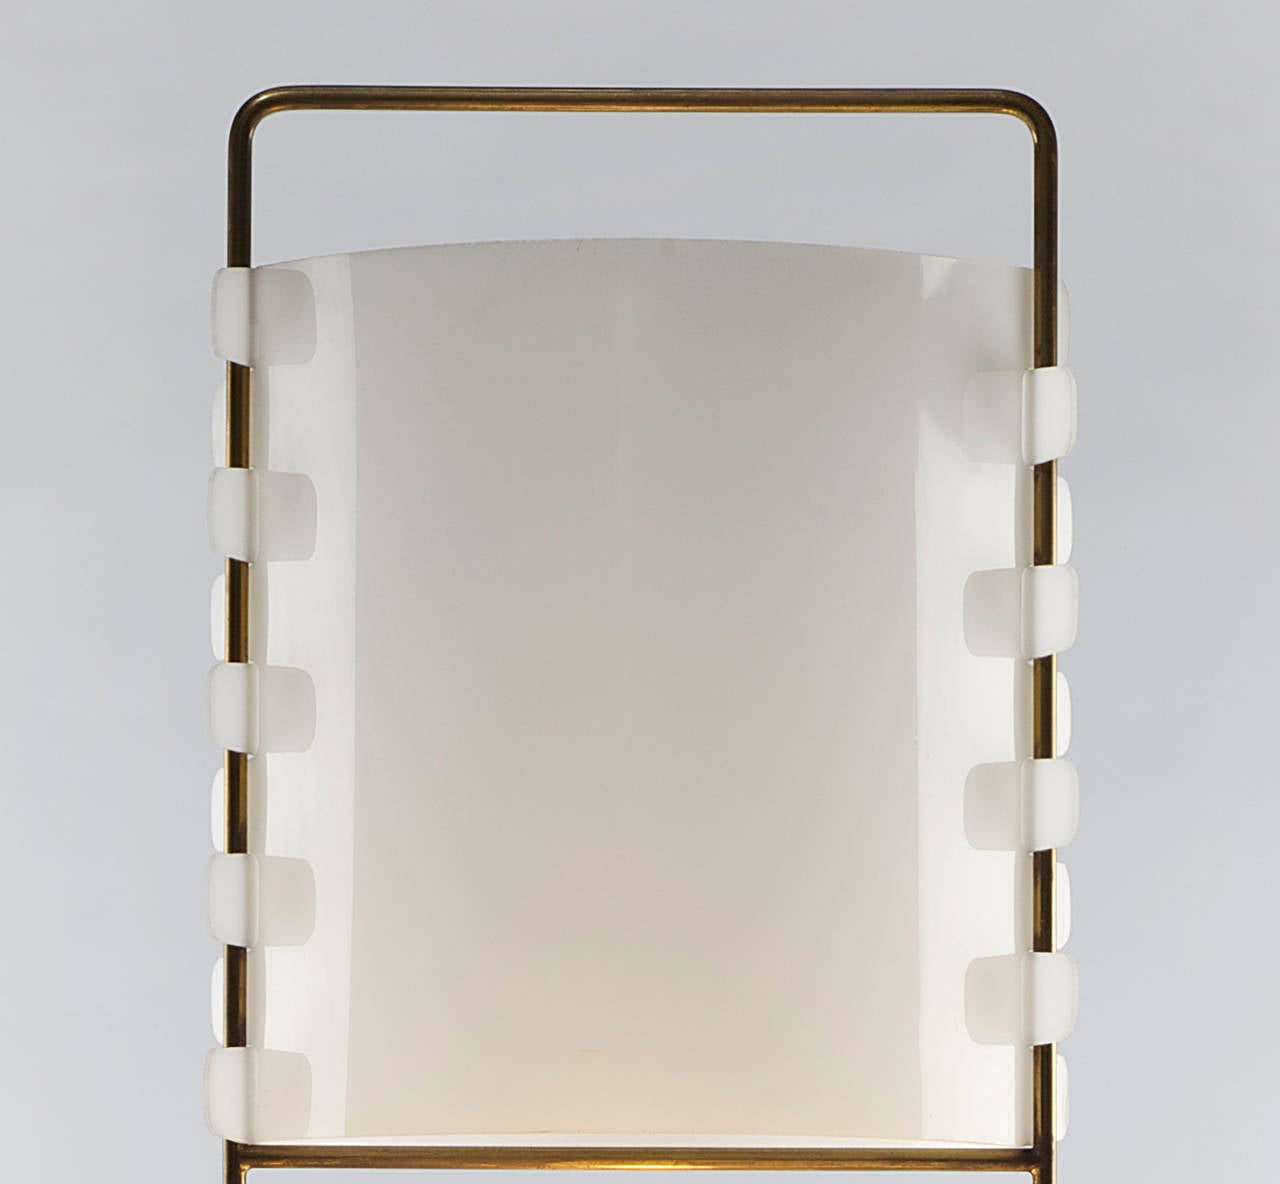 Plexiglass, brass and wood.
Edition Huchers Minvielle.

About the designer: Joseph Andre´ Motte (1925-2013) was a member of the young generation of French designers that emerged immediately following World War II and included Pierre Guariche,